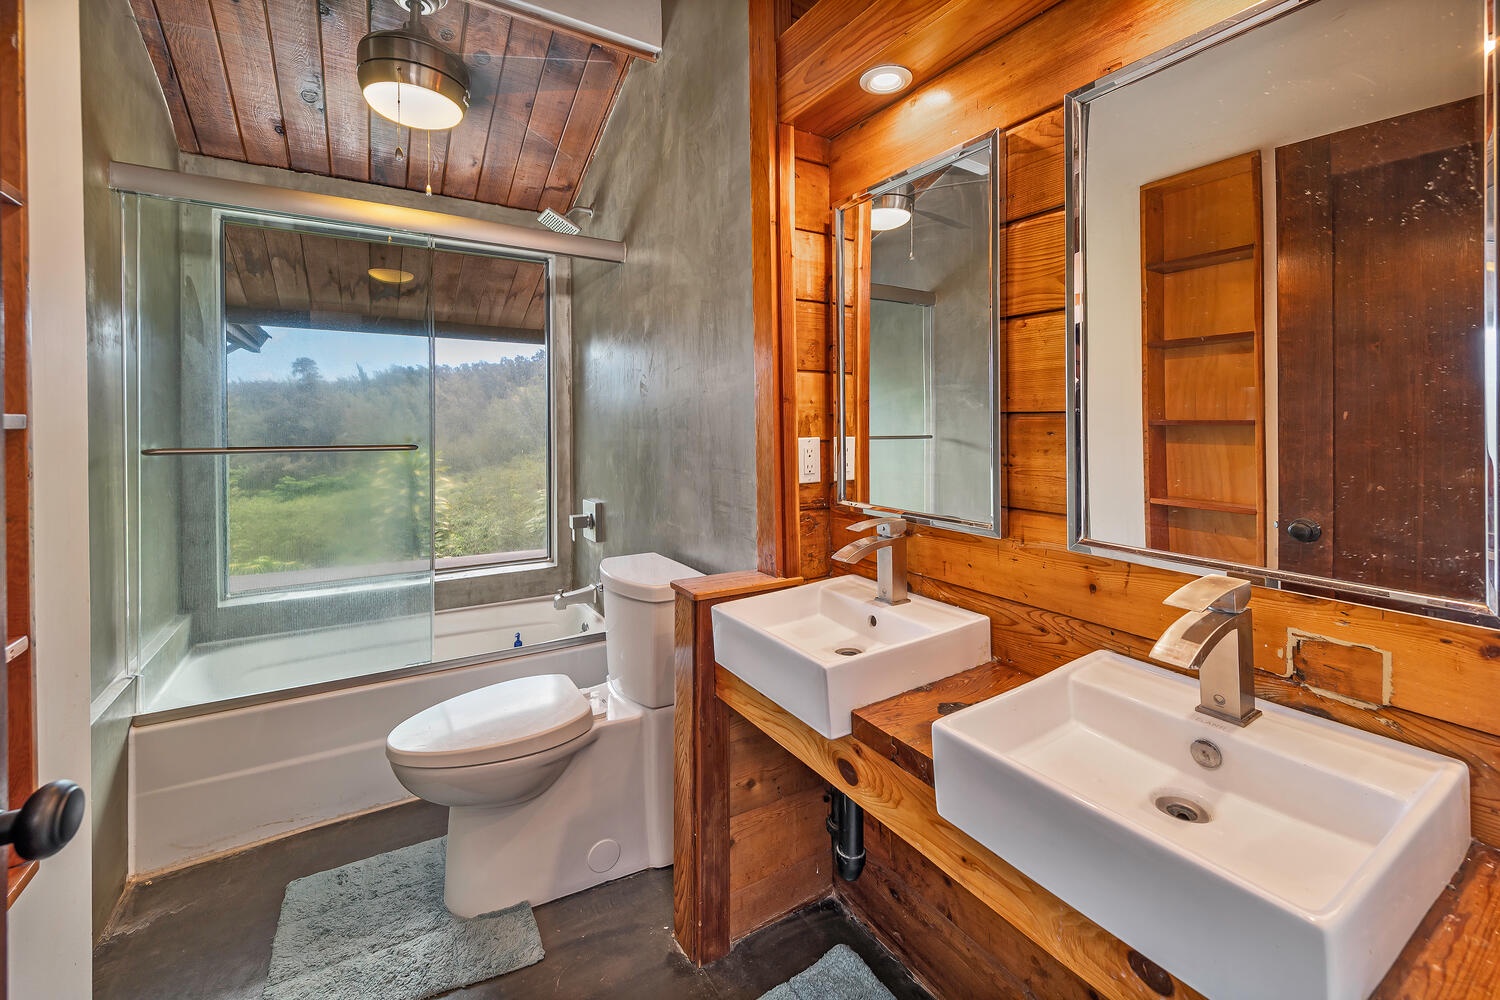 Haleiwa Vacation Rentals, Mele Makana - The upstairs guest bathroom has dual sinks and a shower/tub combo